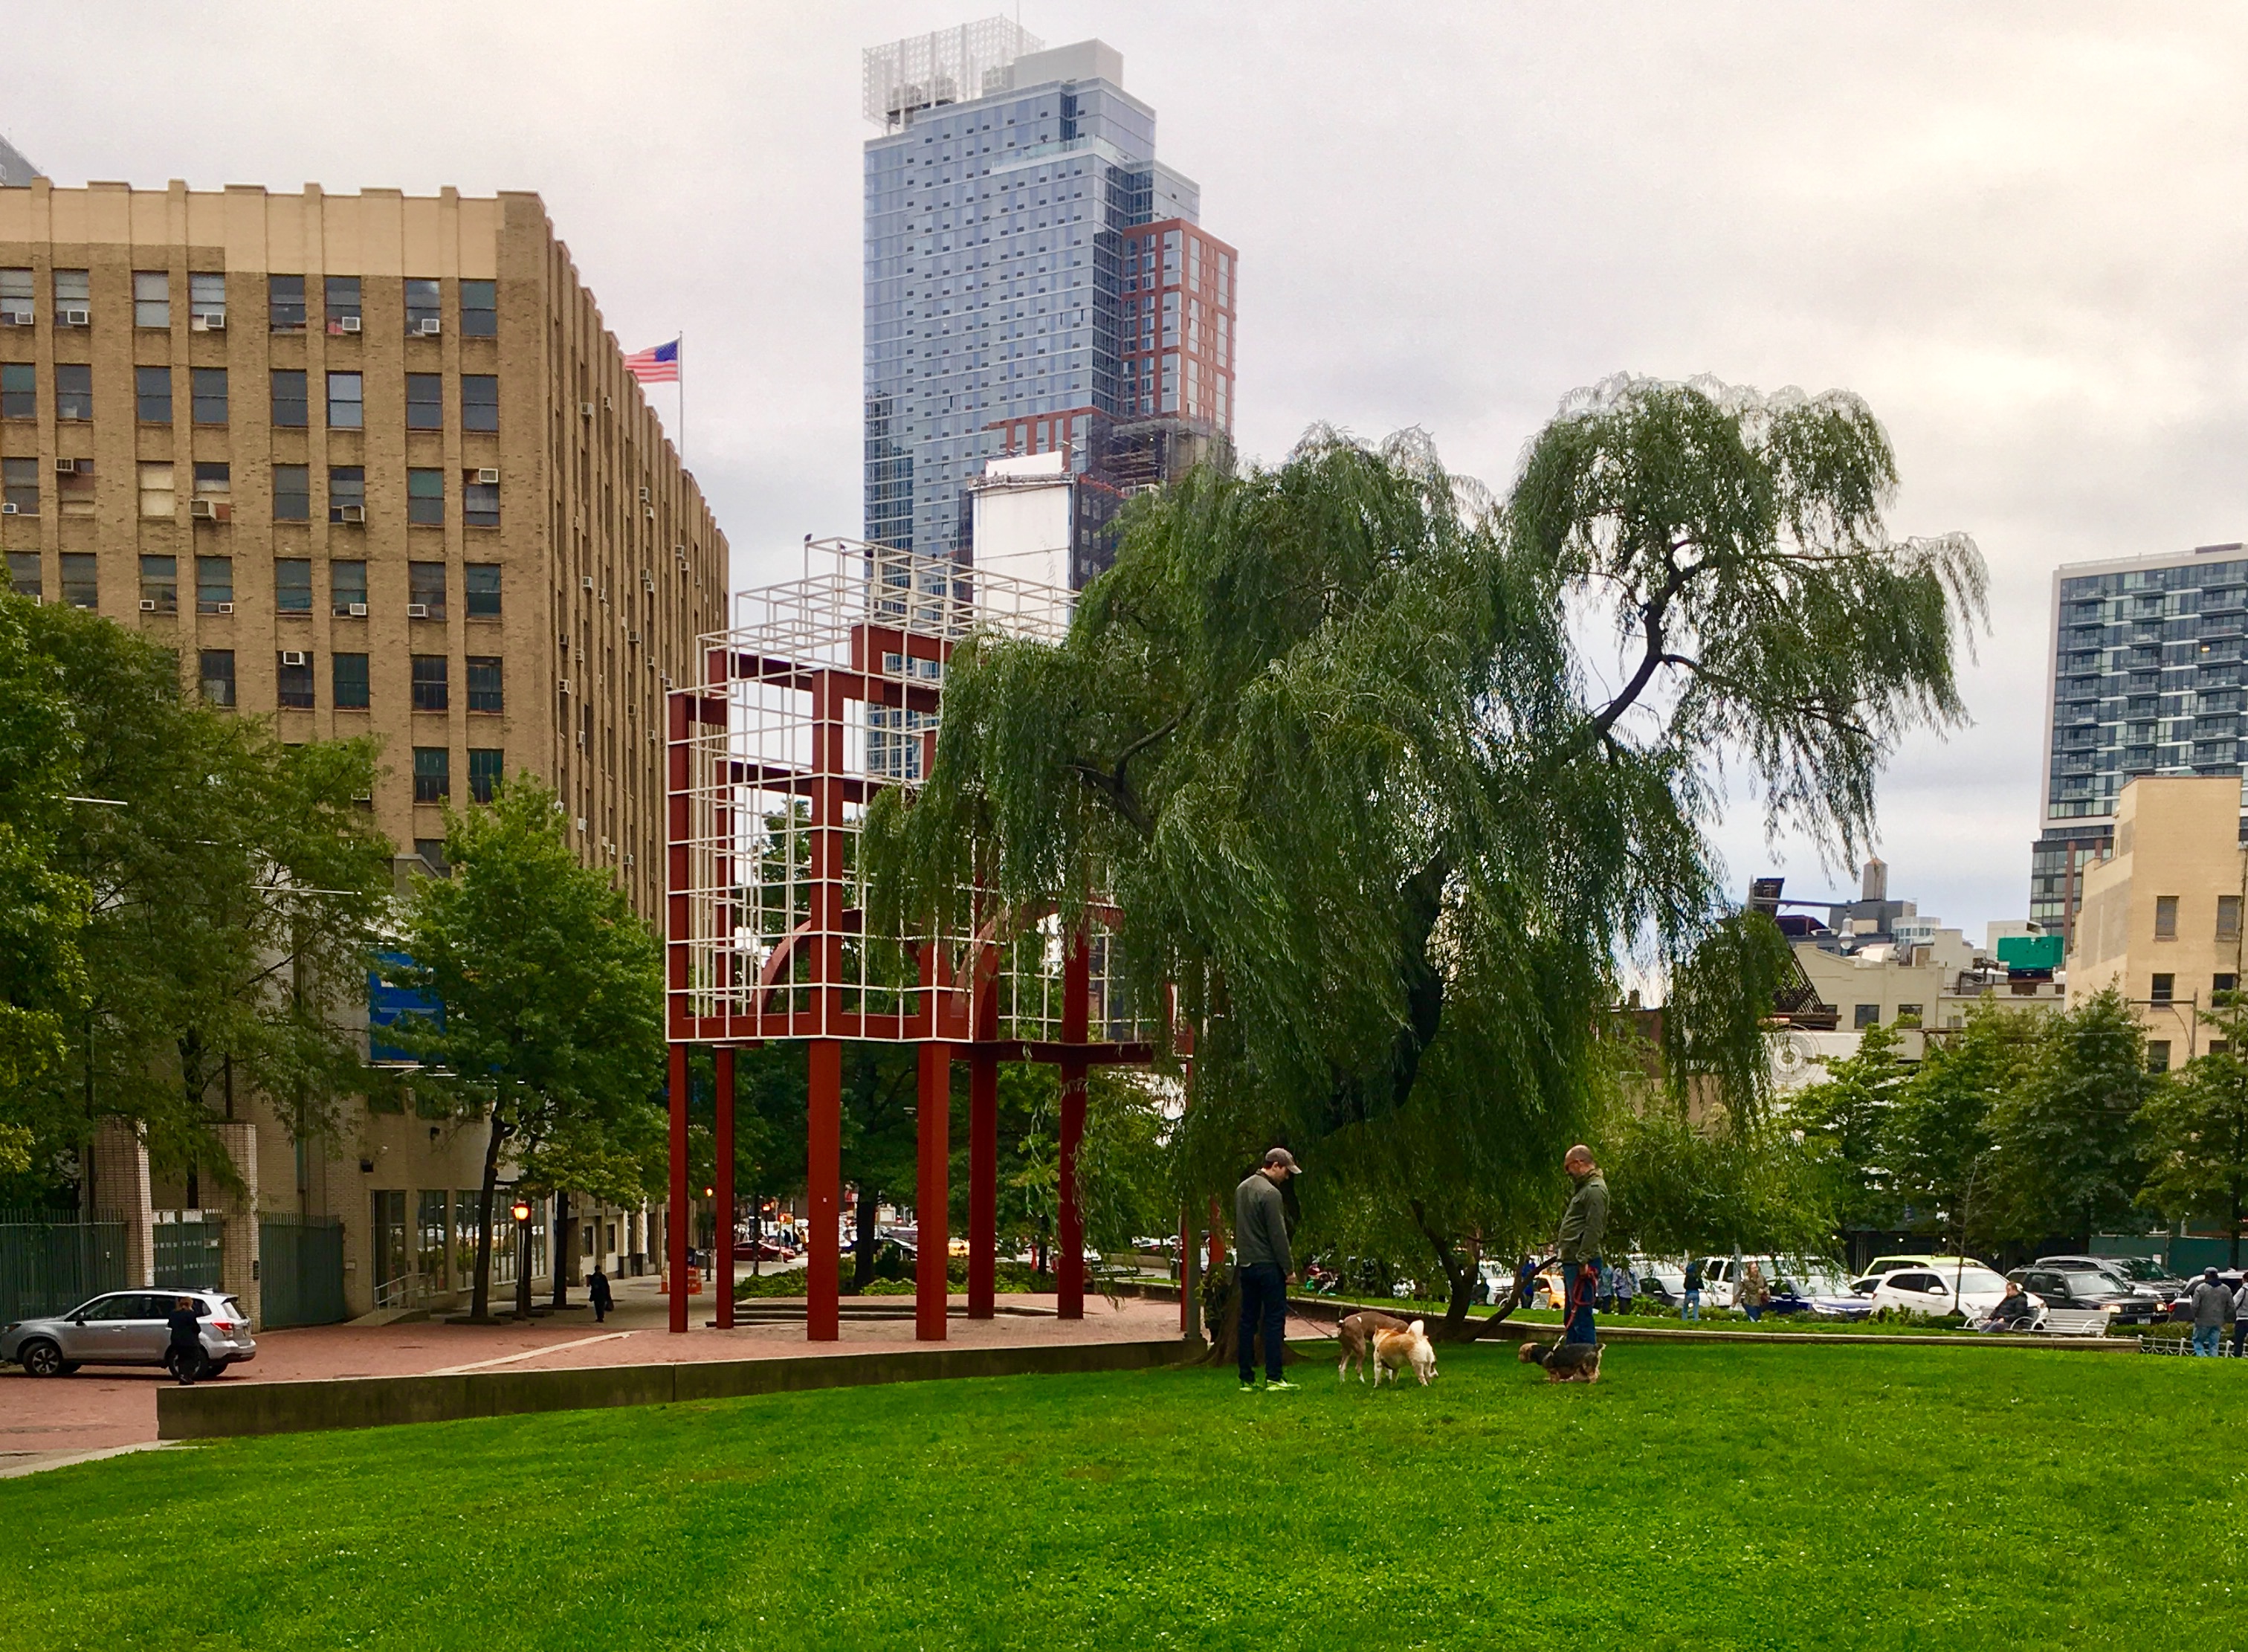 Here’s a glimpse of LIU’s Downtown Brooklyn campus near RXR’s construction site. Eagle file photo by Lore Croghan